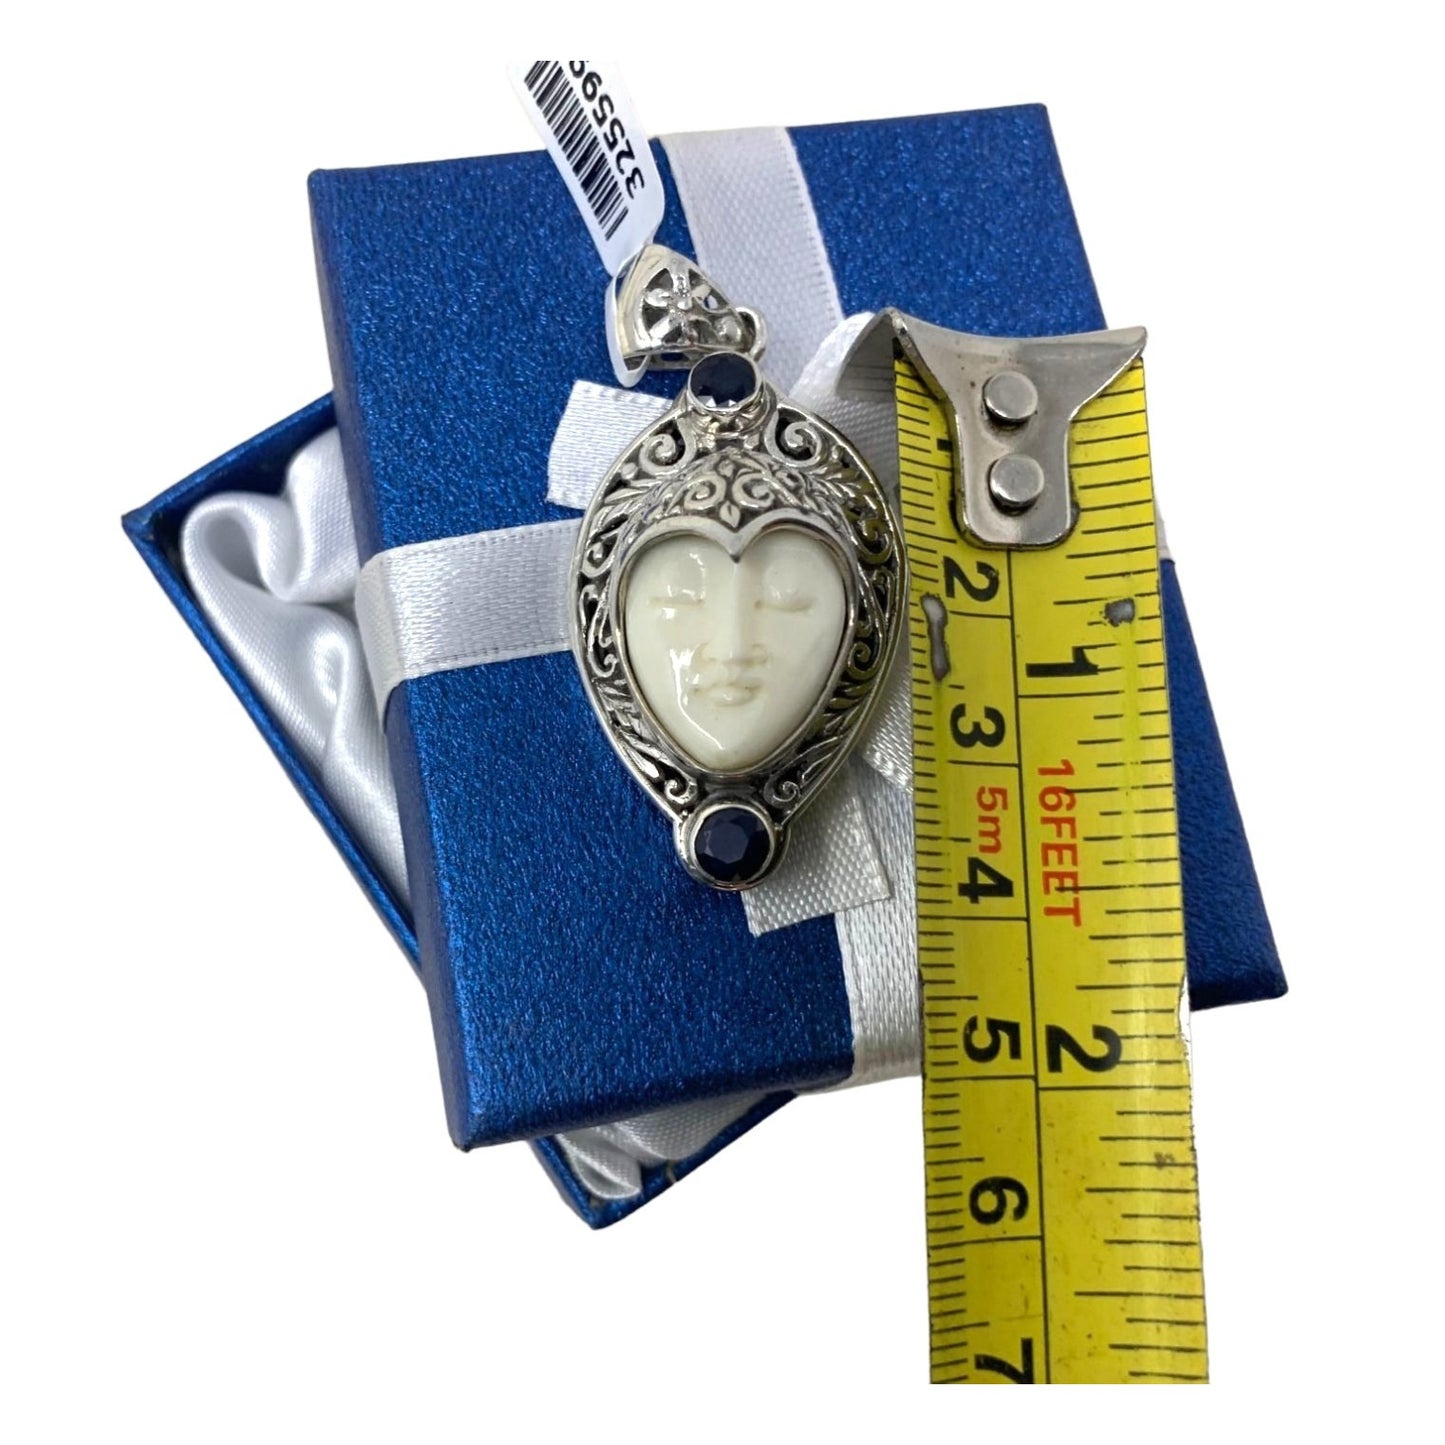 Modern CAMEO Pendant STERLING SILVER - Heart shaped face with filagree surrounding